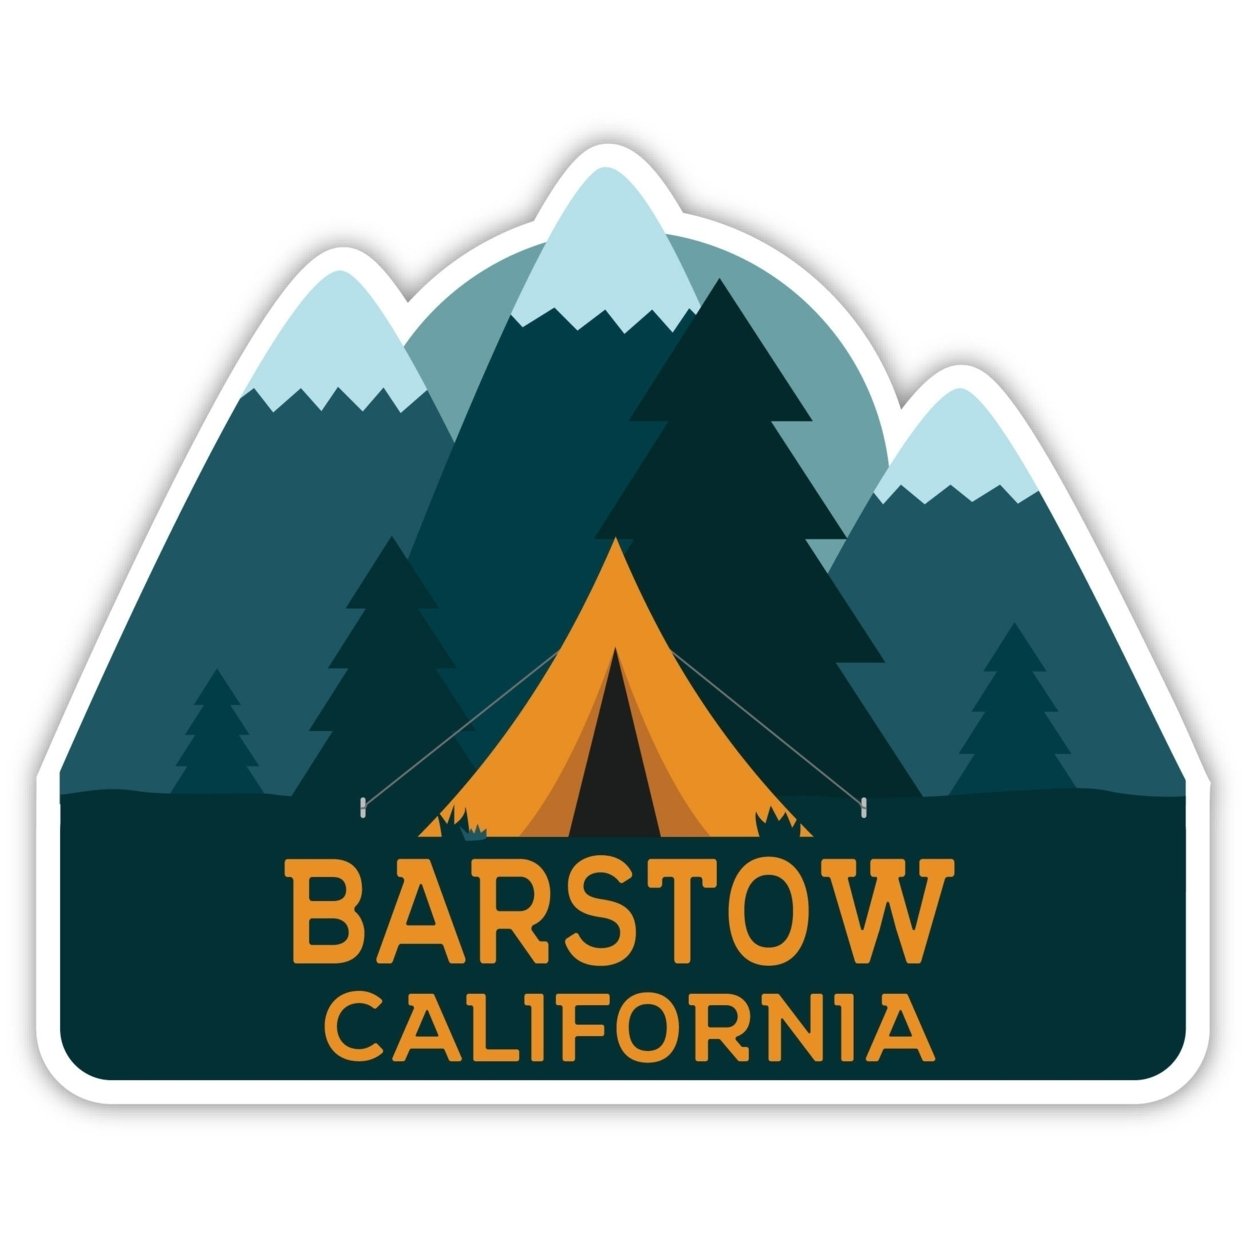 Barstow California Souvenir Decorative Stickers (Choose Theme And Size) - Single Unit, 2-Inch, Tent